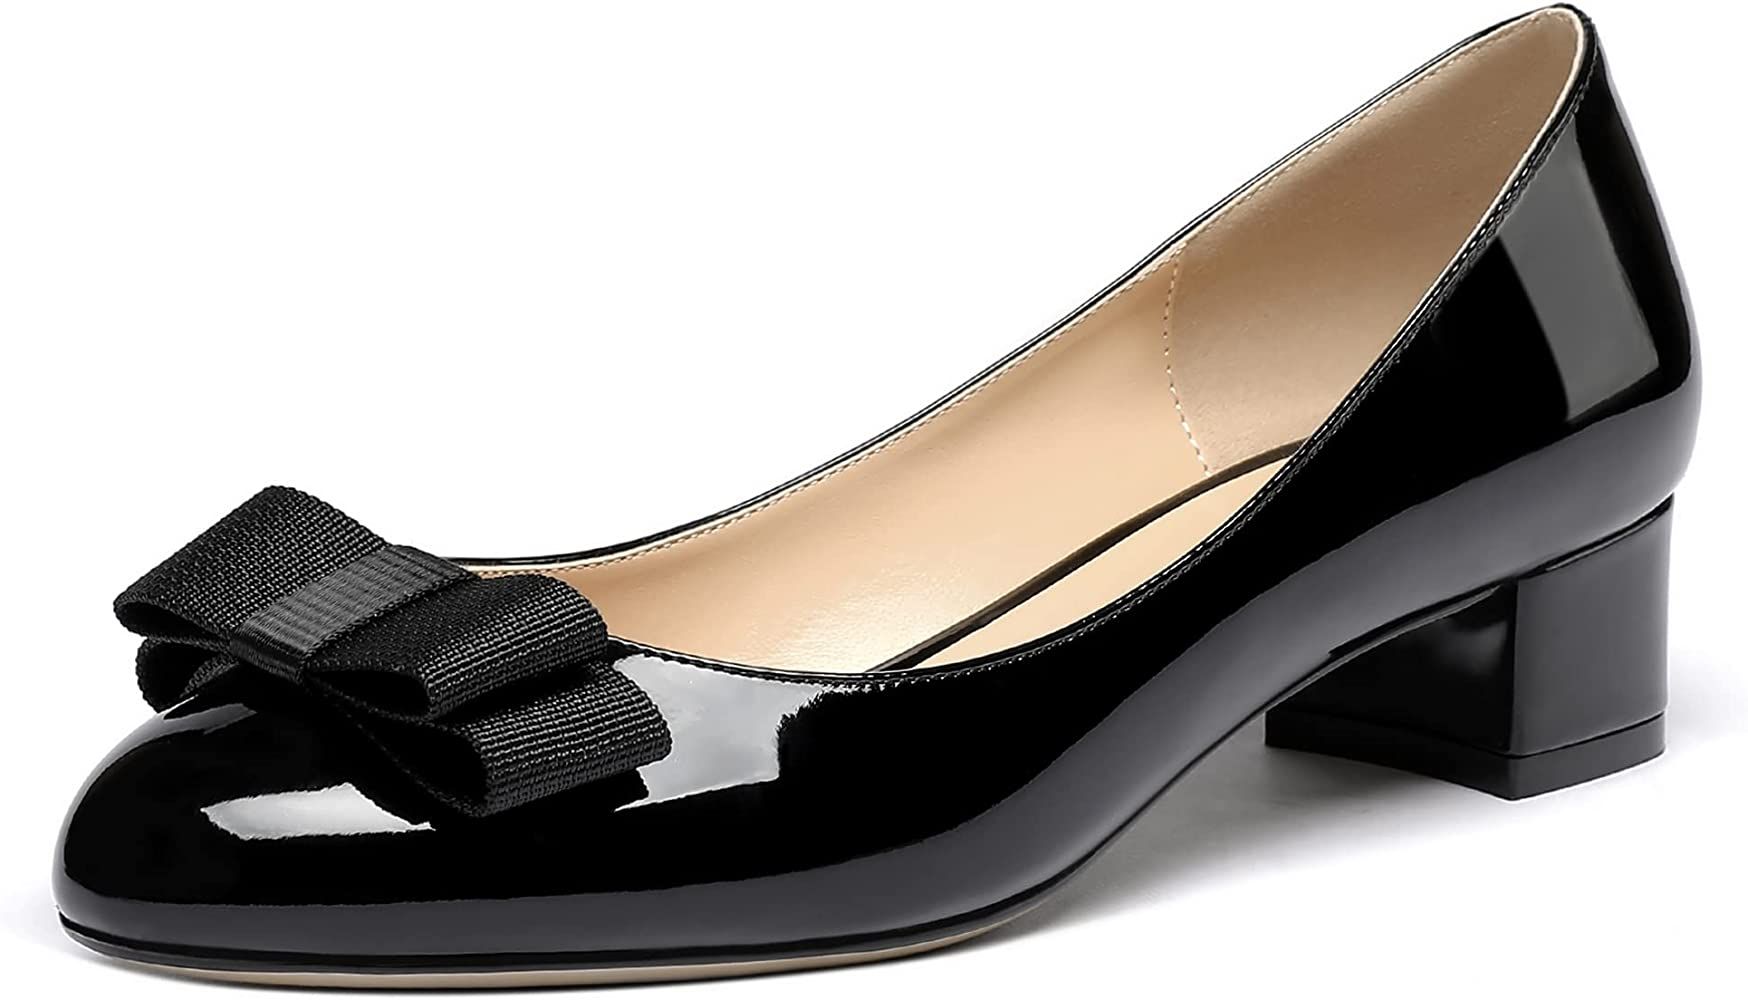 WAYDERNS Women's Patent Leather Bow Slip On Round Toe Chunky Low Heel Pumps Shoes 1.5 Inch | Amazon (US)